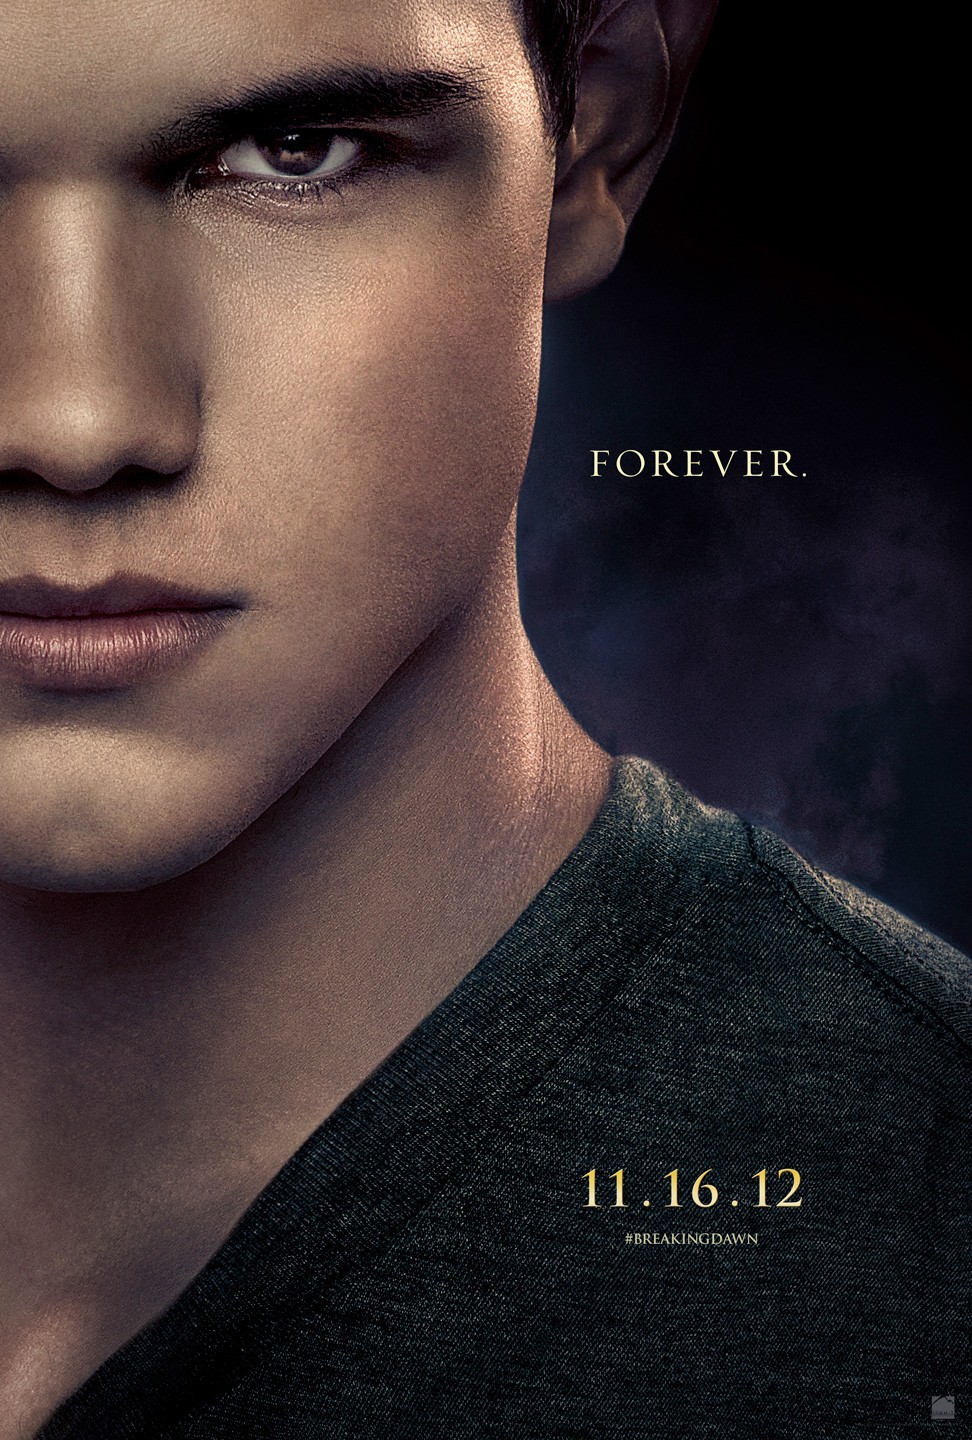 Extra Large Movie Poster Image for The Twilight Saga: Breaking Dawn - Part 2 (#4 of 11)